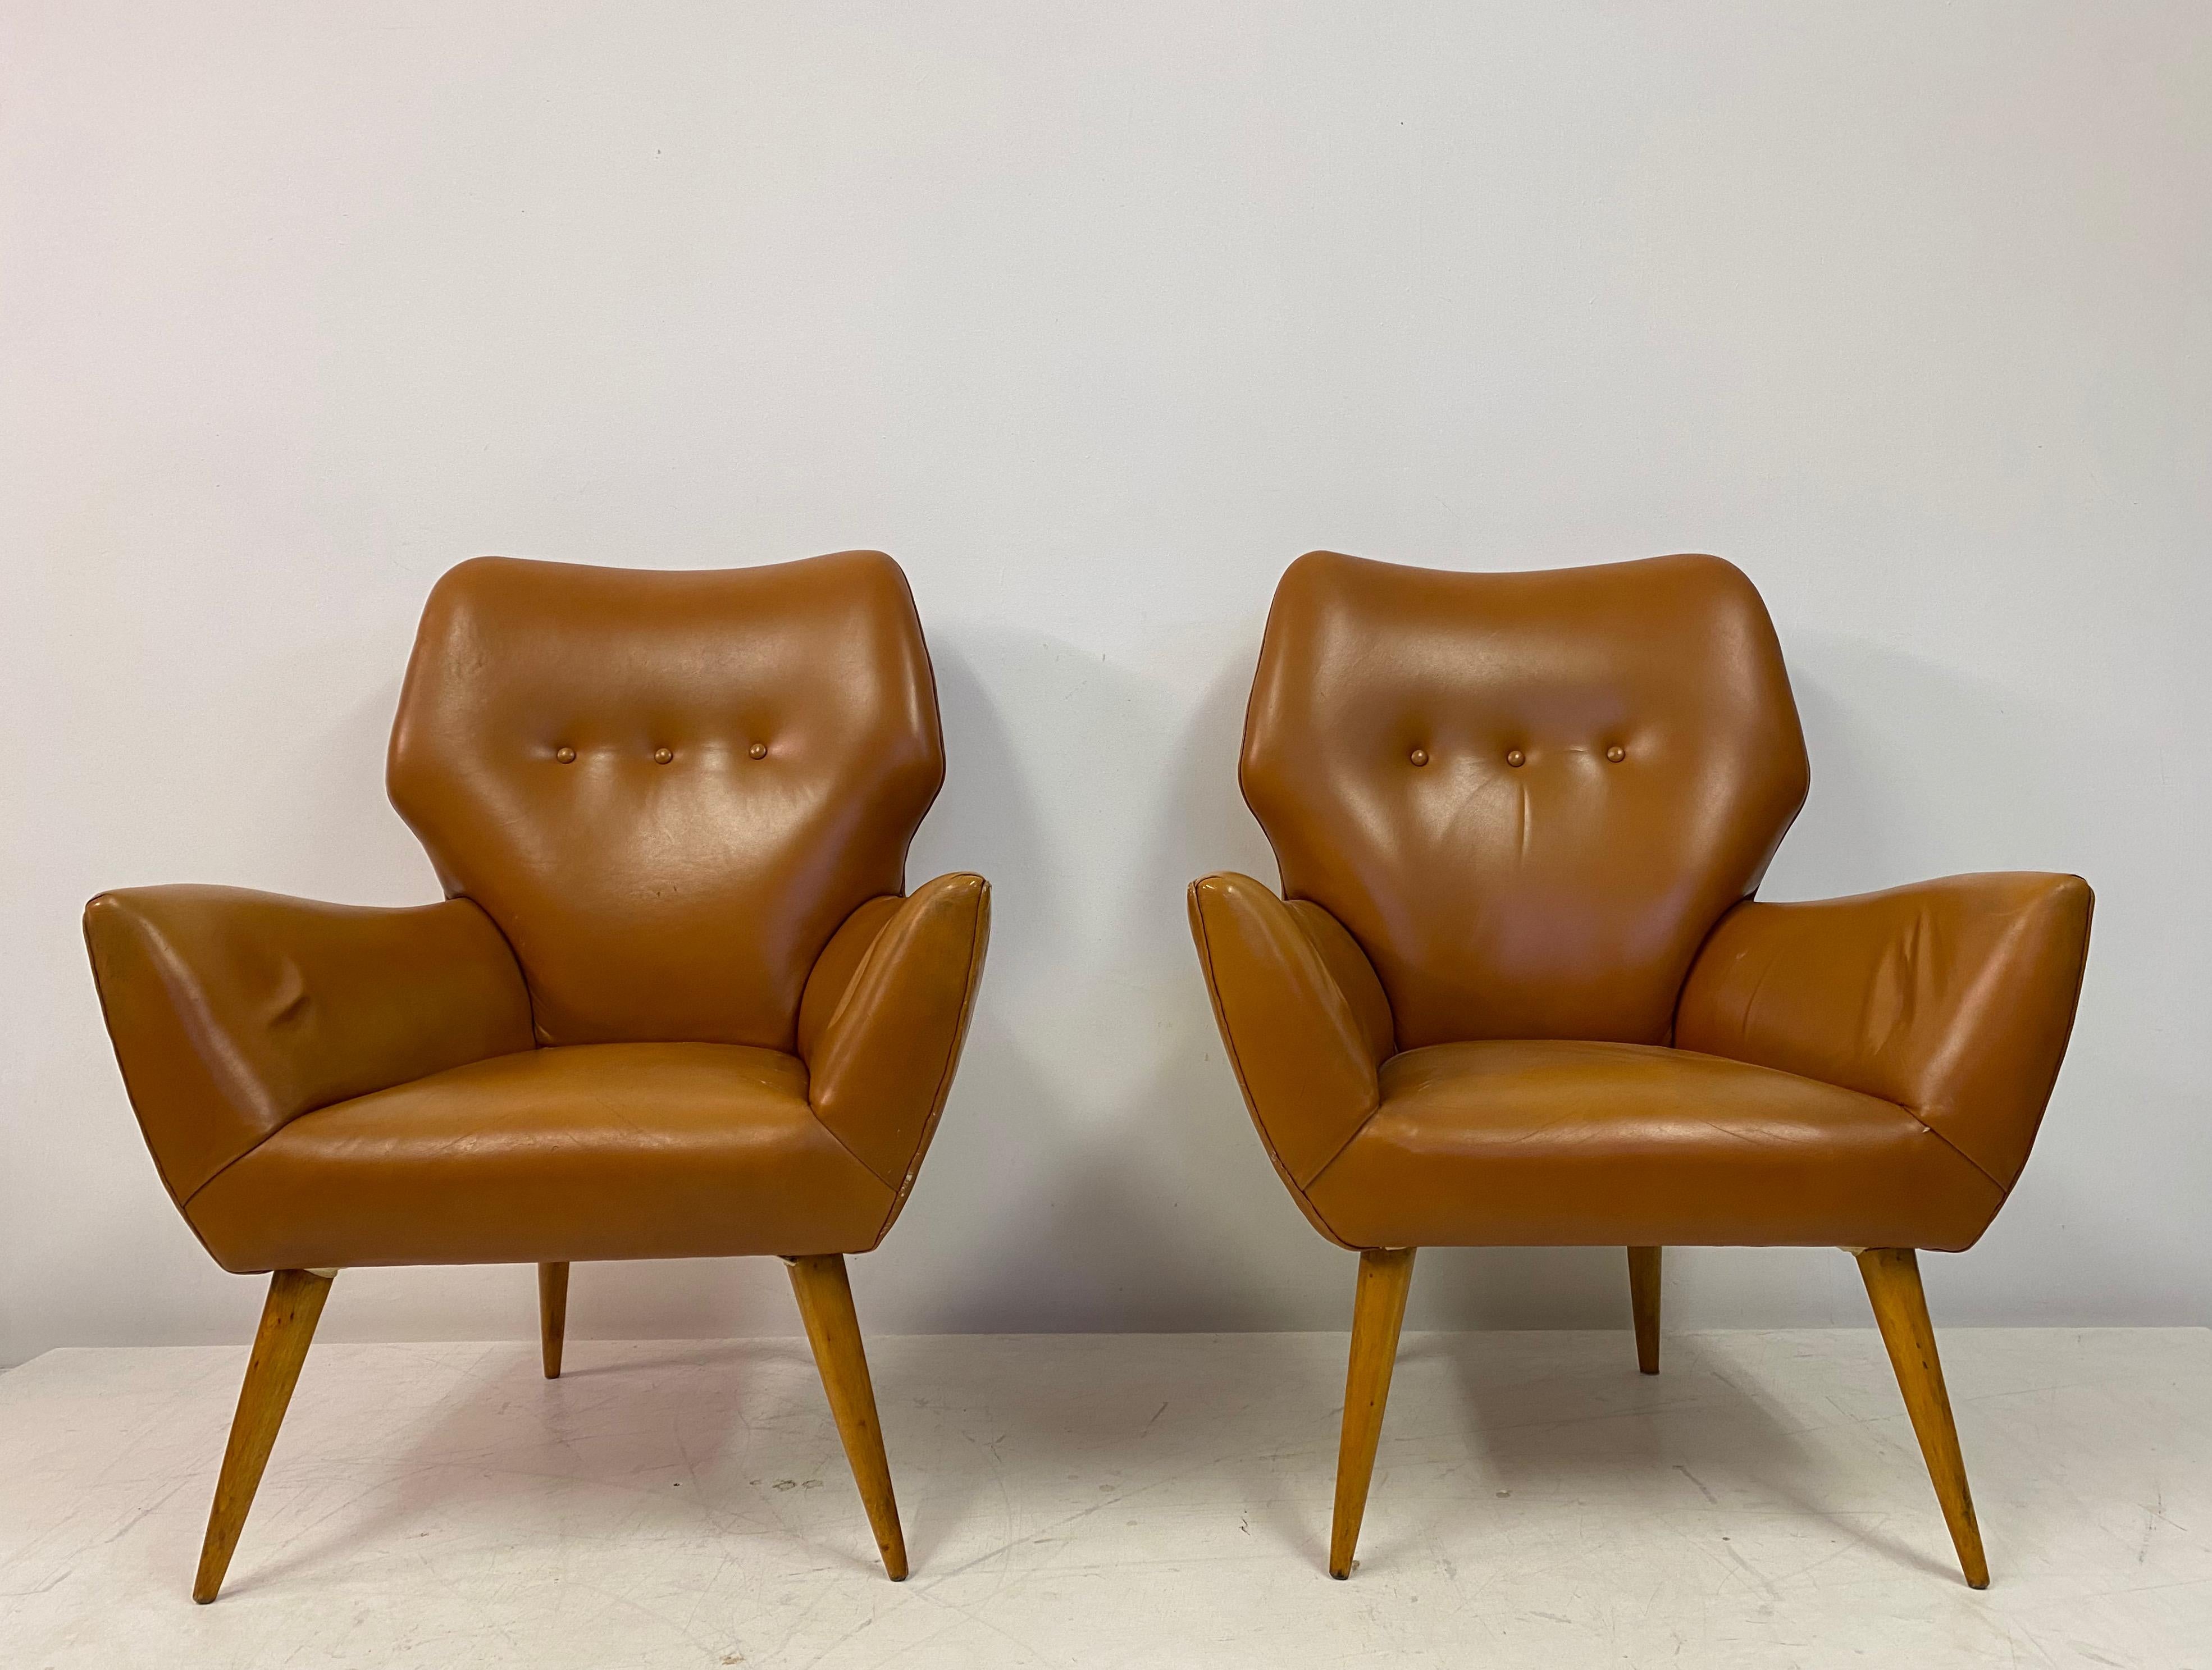 Pair of armchairs

Upholstered in leather

Turned beech legs

Seat height 38cm

Italy 1950s